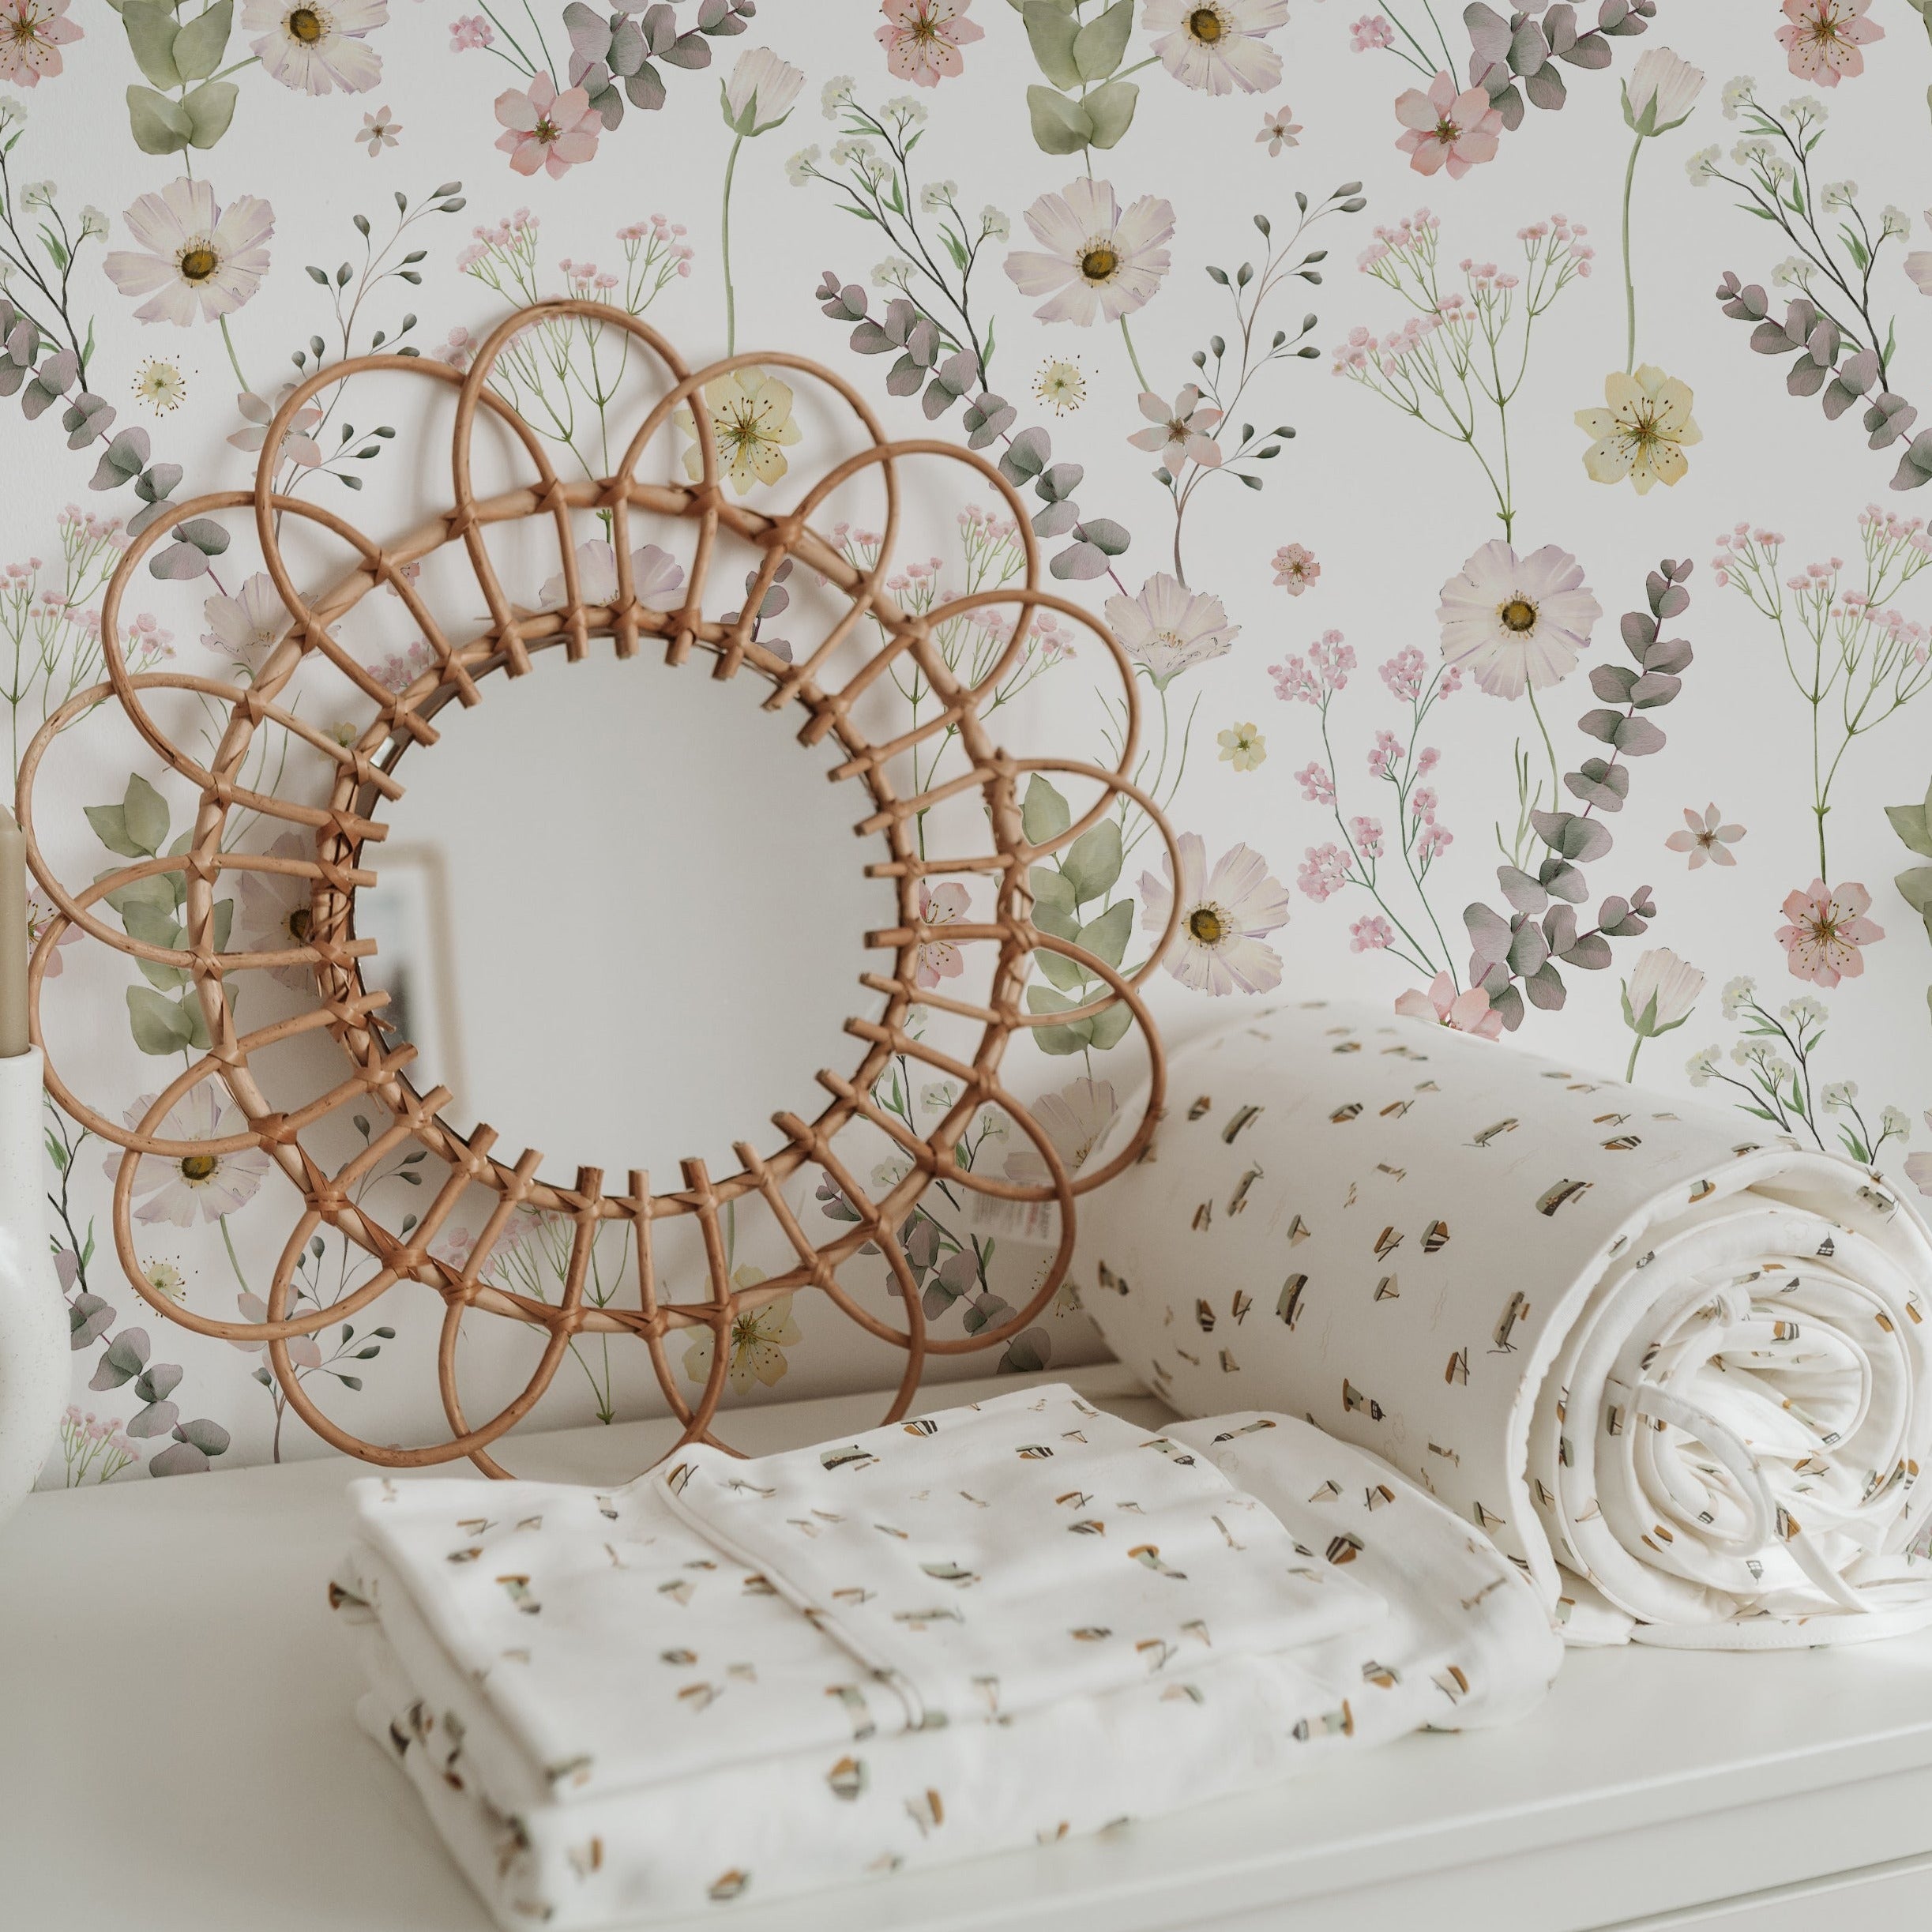 A close-up of a nursery room corner with a woven circular mirror above a white dresser. The Botanical Muse Wallpaper provides a soft backdrop with its floral design, complemented by a heart-shaped pillow and white bedding with a botanical print.